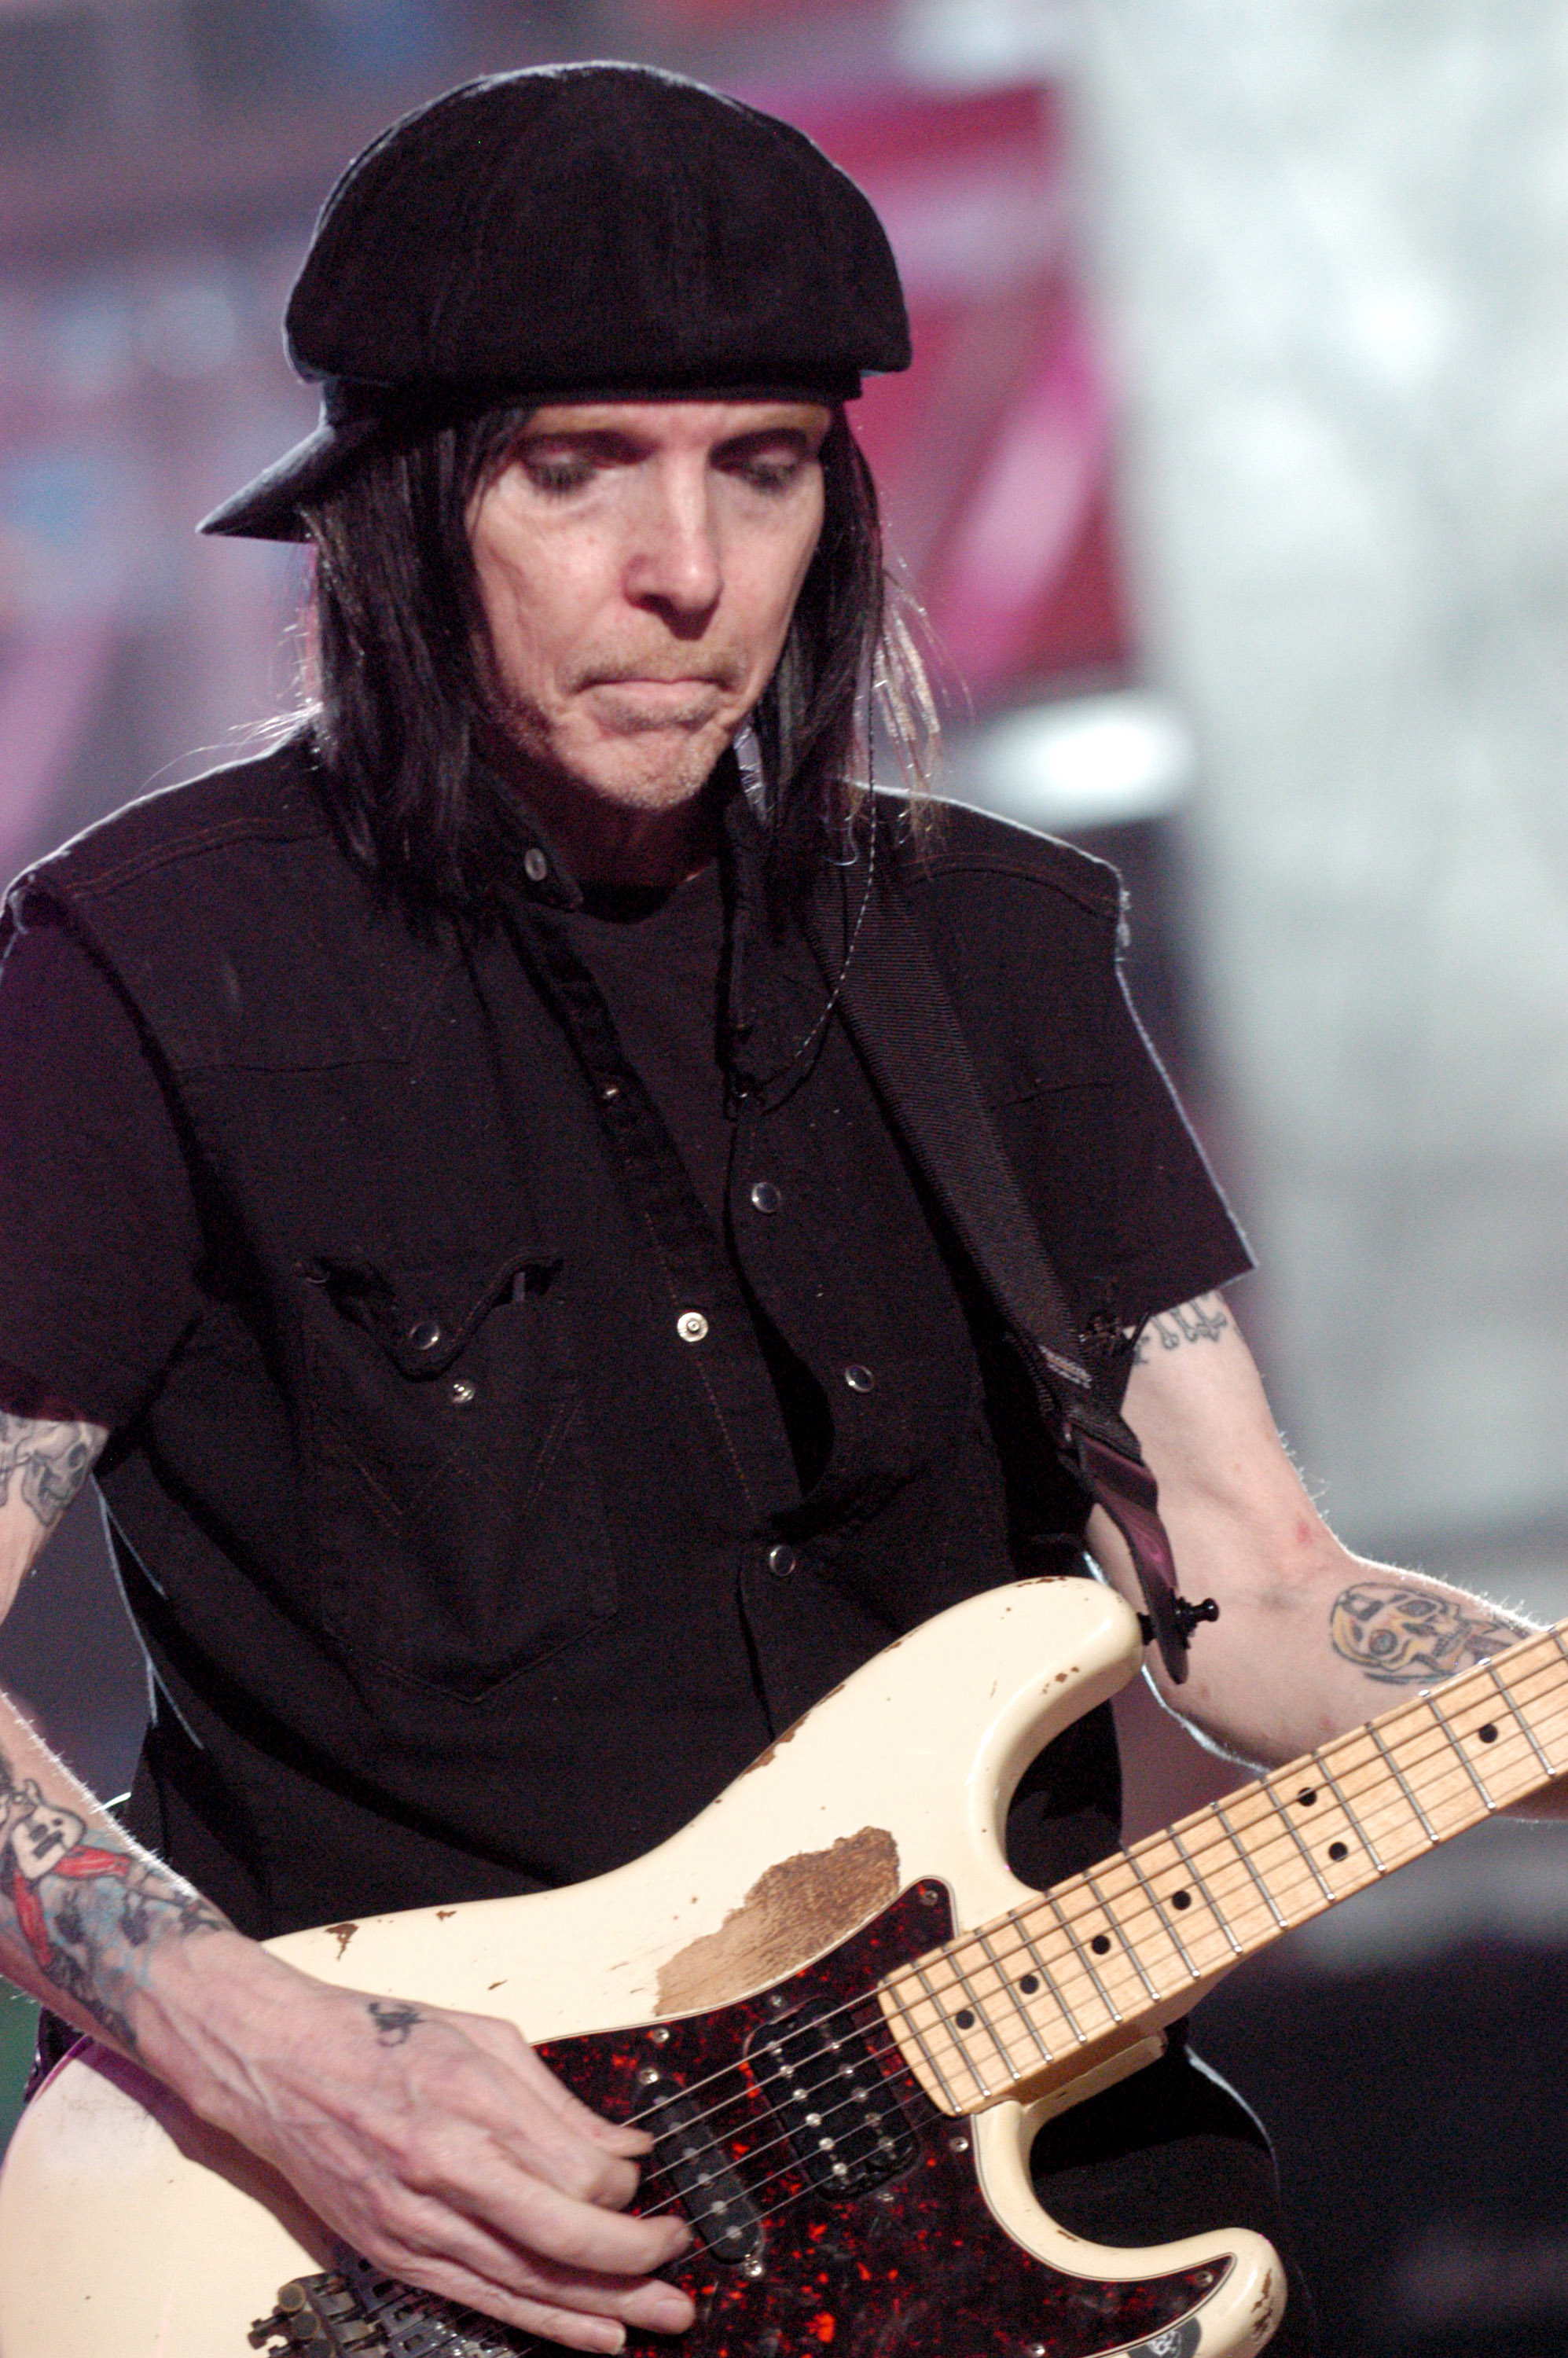 Mick Mars of Motley Crue is pictured during Spike TV's 2nd Annual "Video Game Awards 2004," airing on Spike TV Live in Santa Monica, California | Source: Getty Images